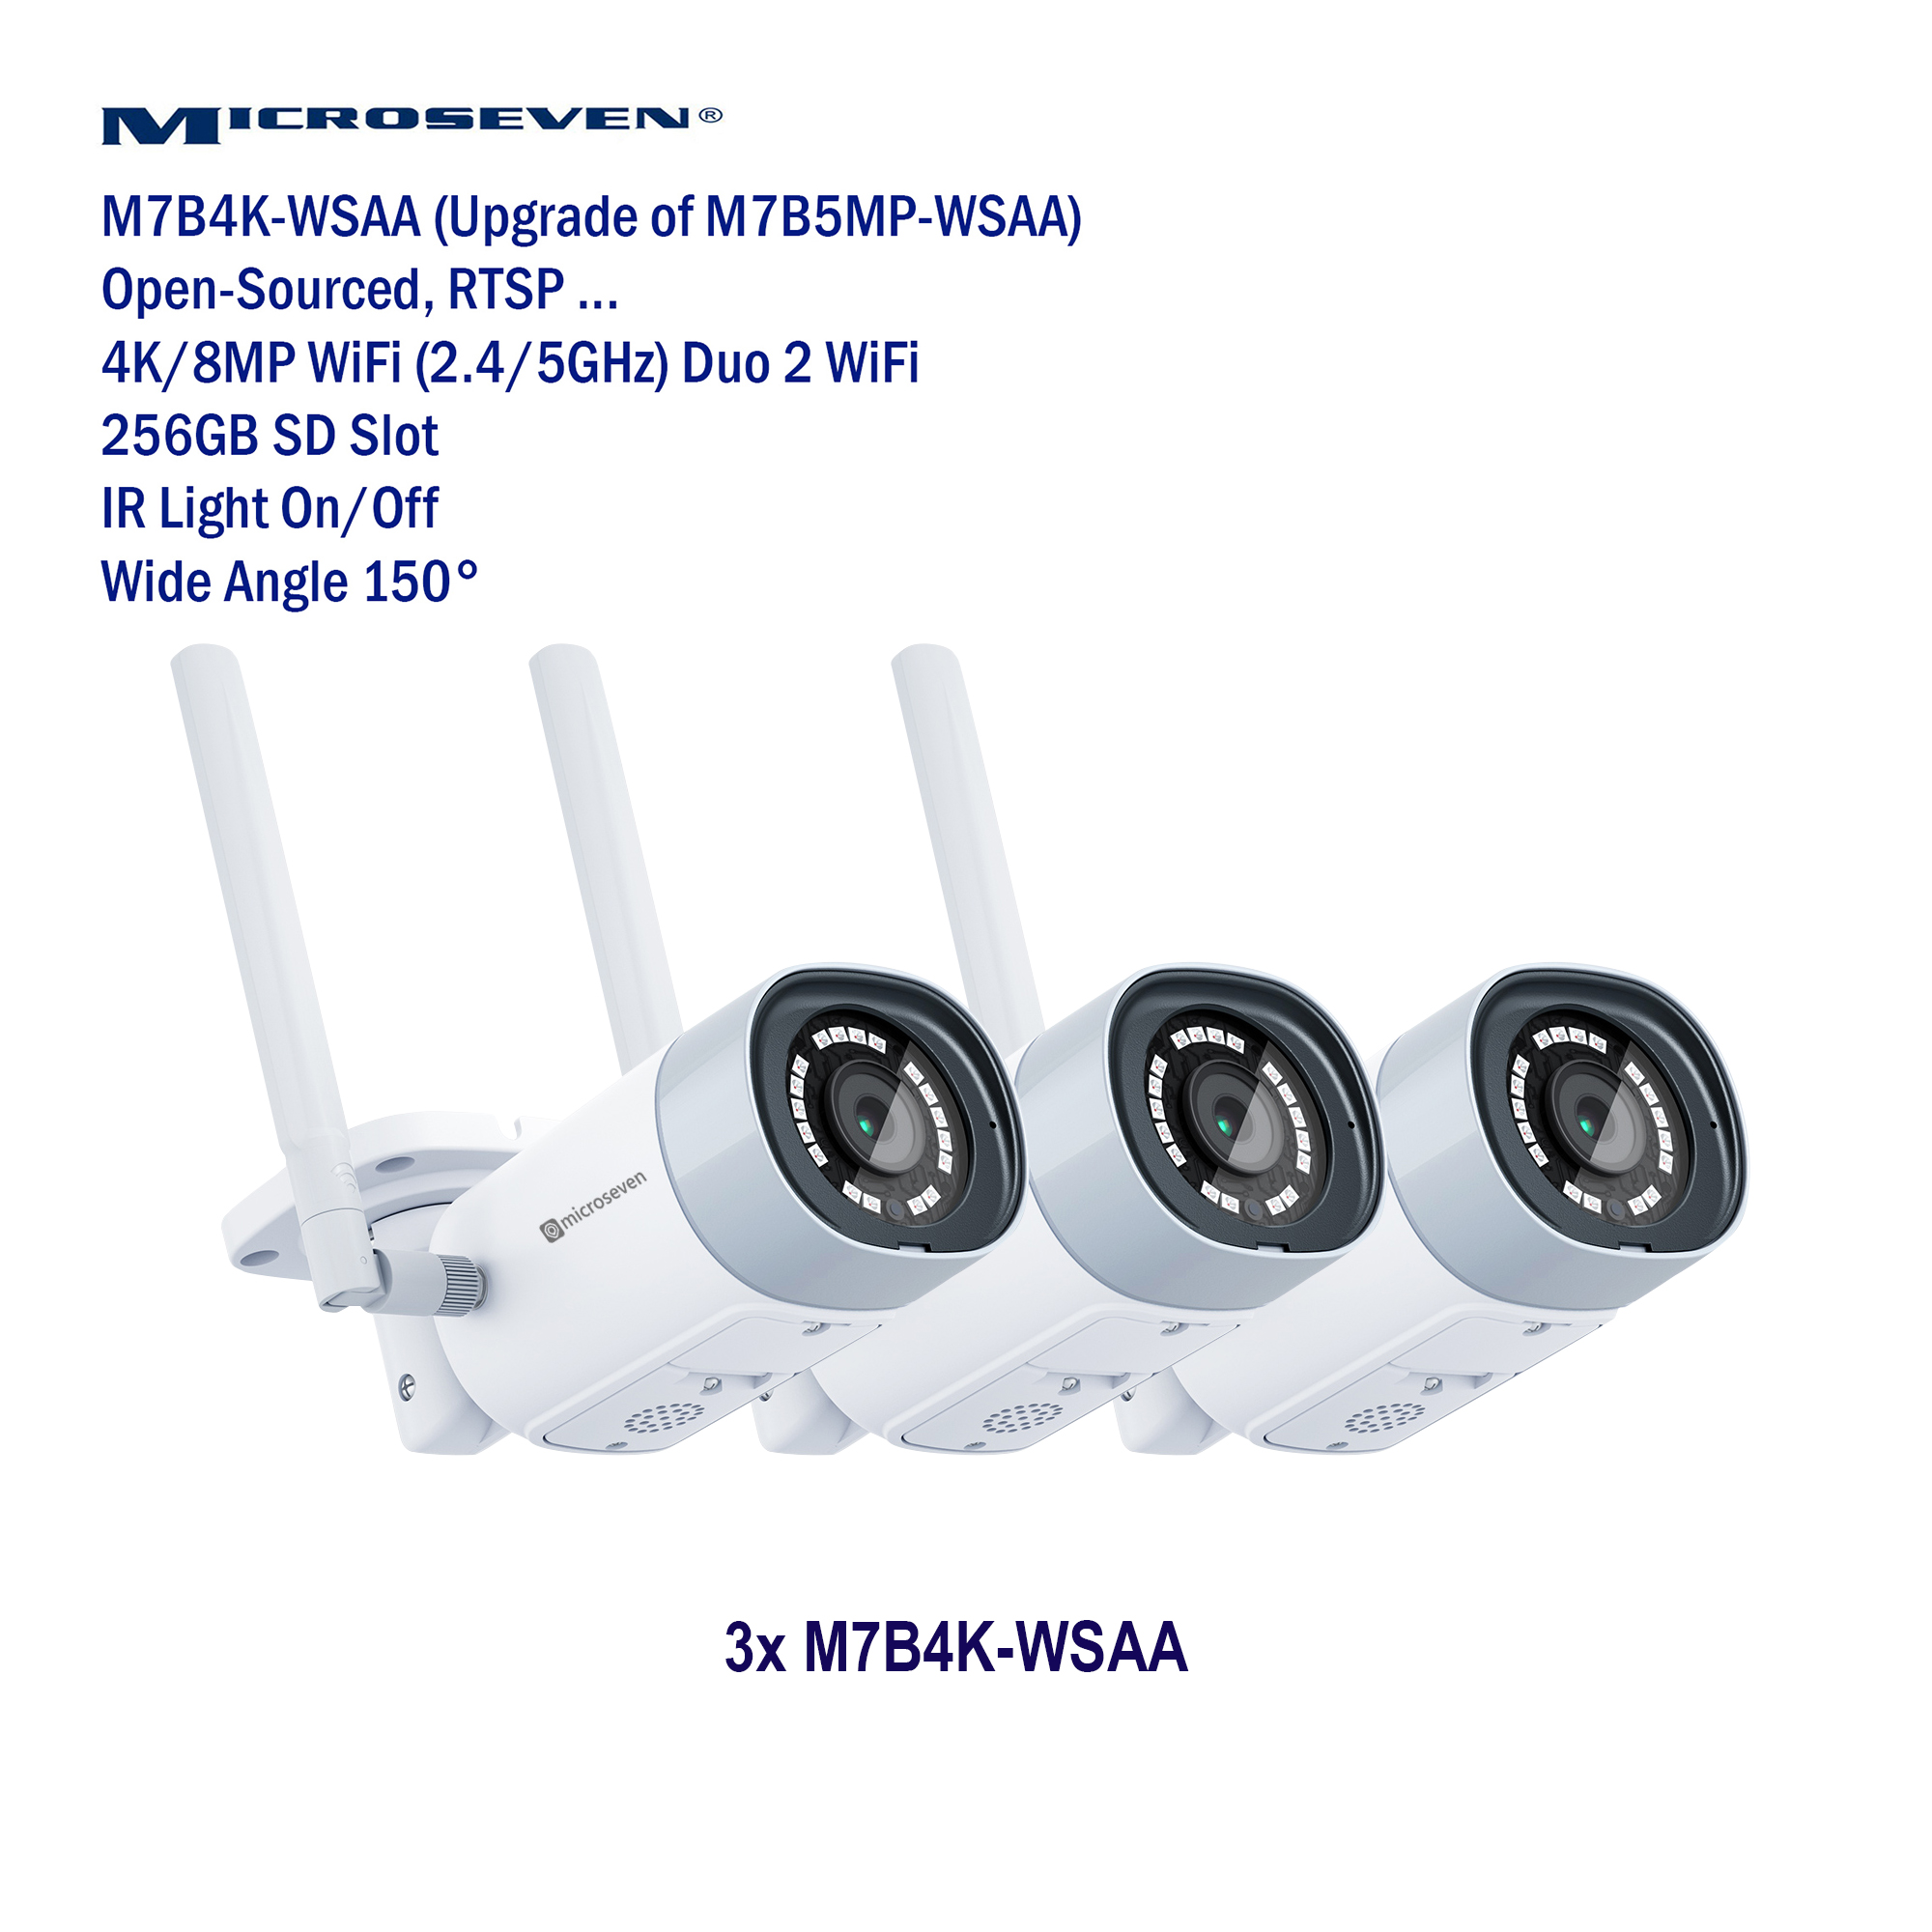 3x Microseven Open Source Ultra HD 4K/8MP(3840x2160) Duo 2 WiFi 2.4/5 GHz SONY 1/2.8" Chipset CMOS 2.8mm 8MP Lens Ultra-Wide Angle, Two-Way Audio with Built-in Amplified Microphone and Speaker plug and Play ONVIF, IR Light (On/Off in the APP) Security Outdoor IP Camera, Human/Vehicle Detection, 256GB SD Slot, Day & Night, Web GUI & Apps, CMS (Camera Management System) M7 Cloud Storage and Broadcasting on YouTube & Microseven